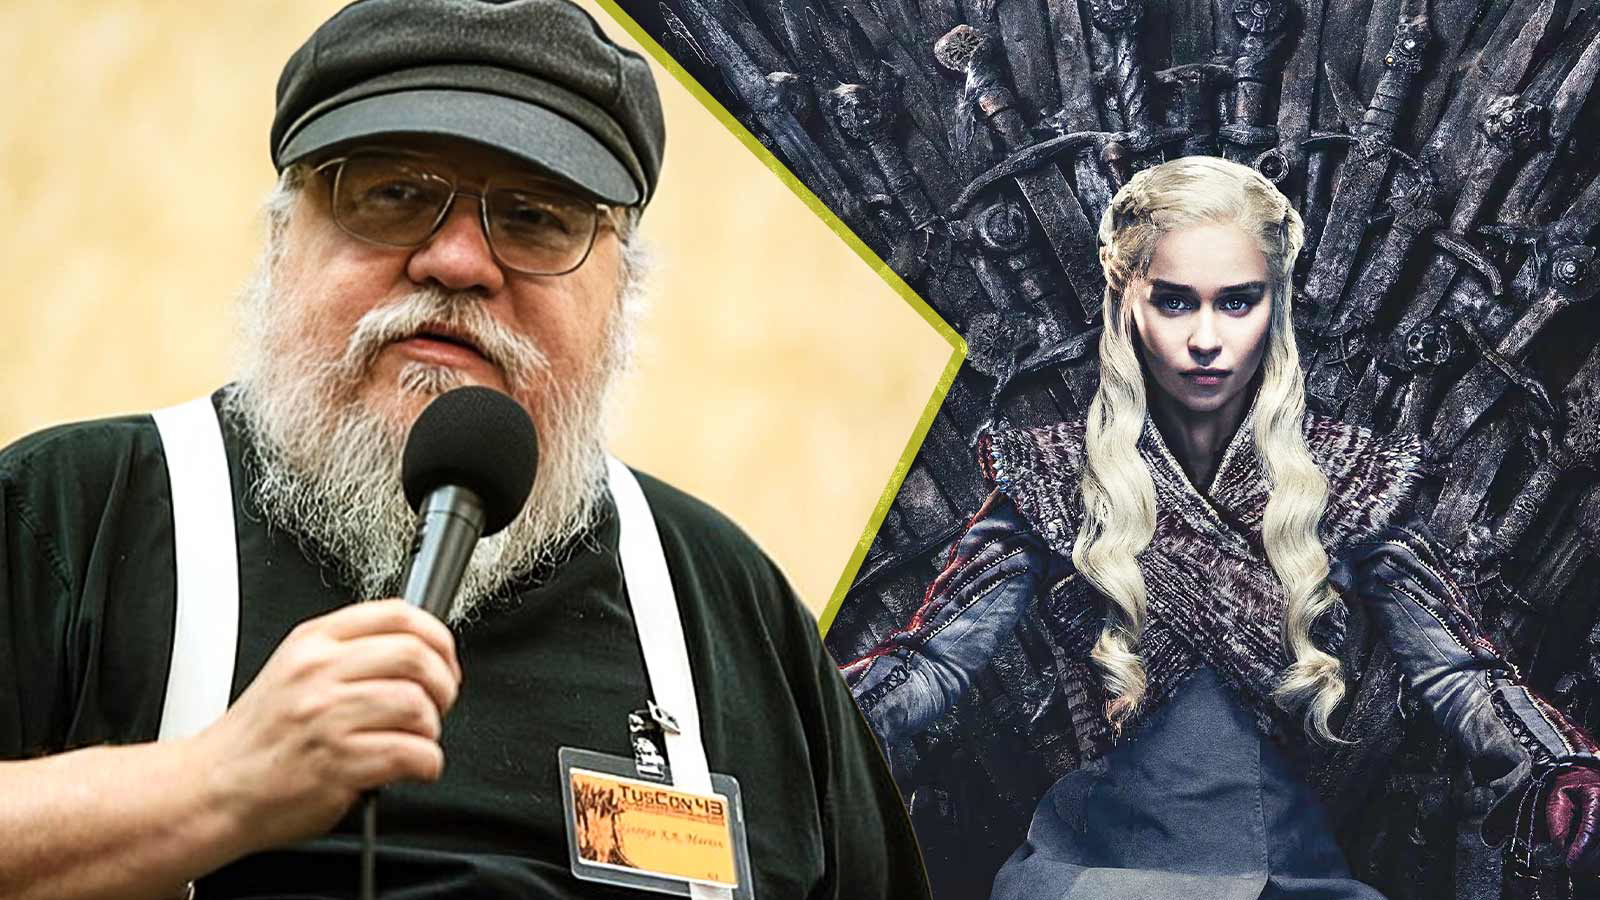 “Nobody ever got it right”: HBO Got 1 Thing Wrong About the Iron Throne That Originally Sent George R. R. Martin on a Wild Goose Chase